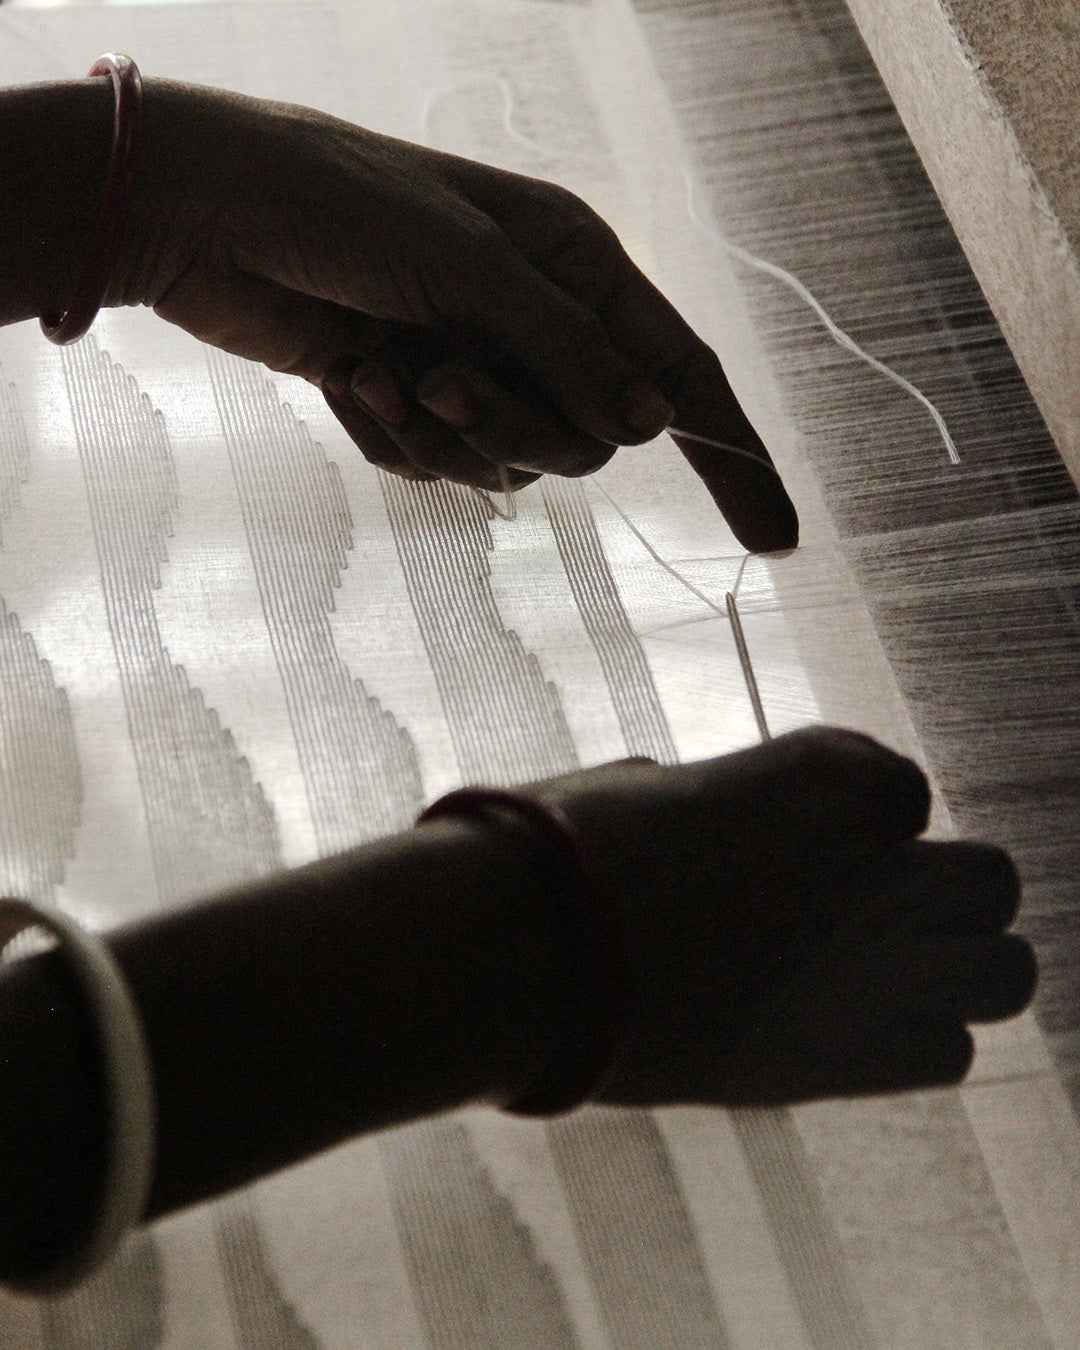 The hands of a Varana craftsman hand-weaving sustainable fabric